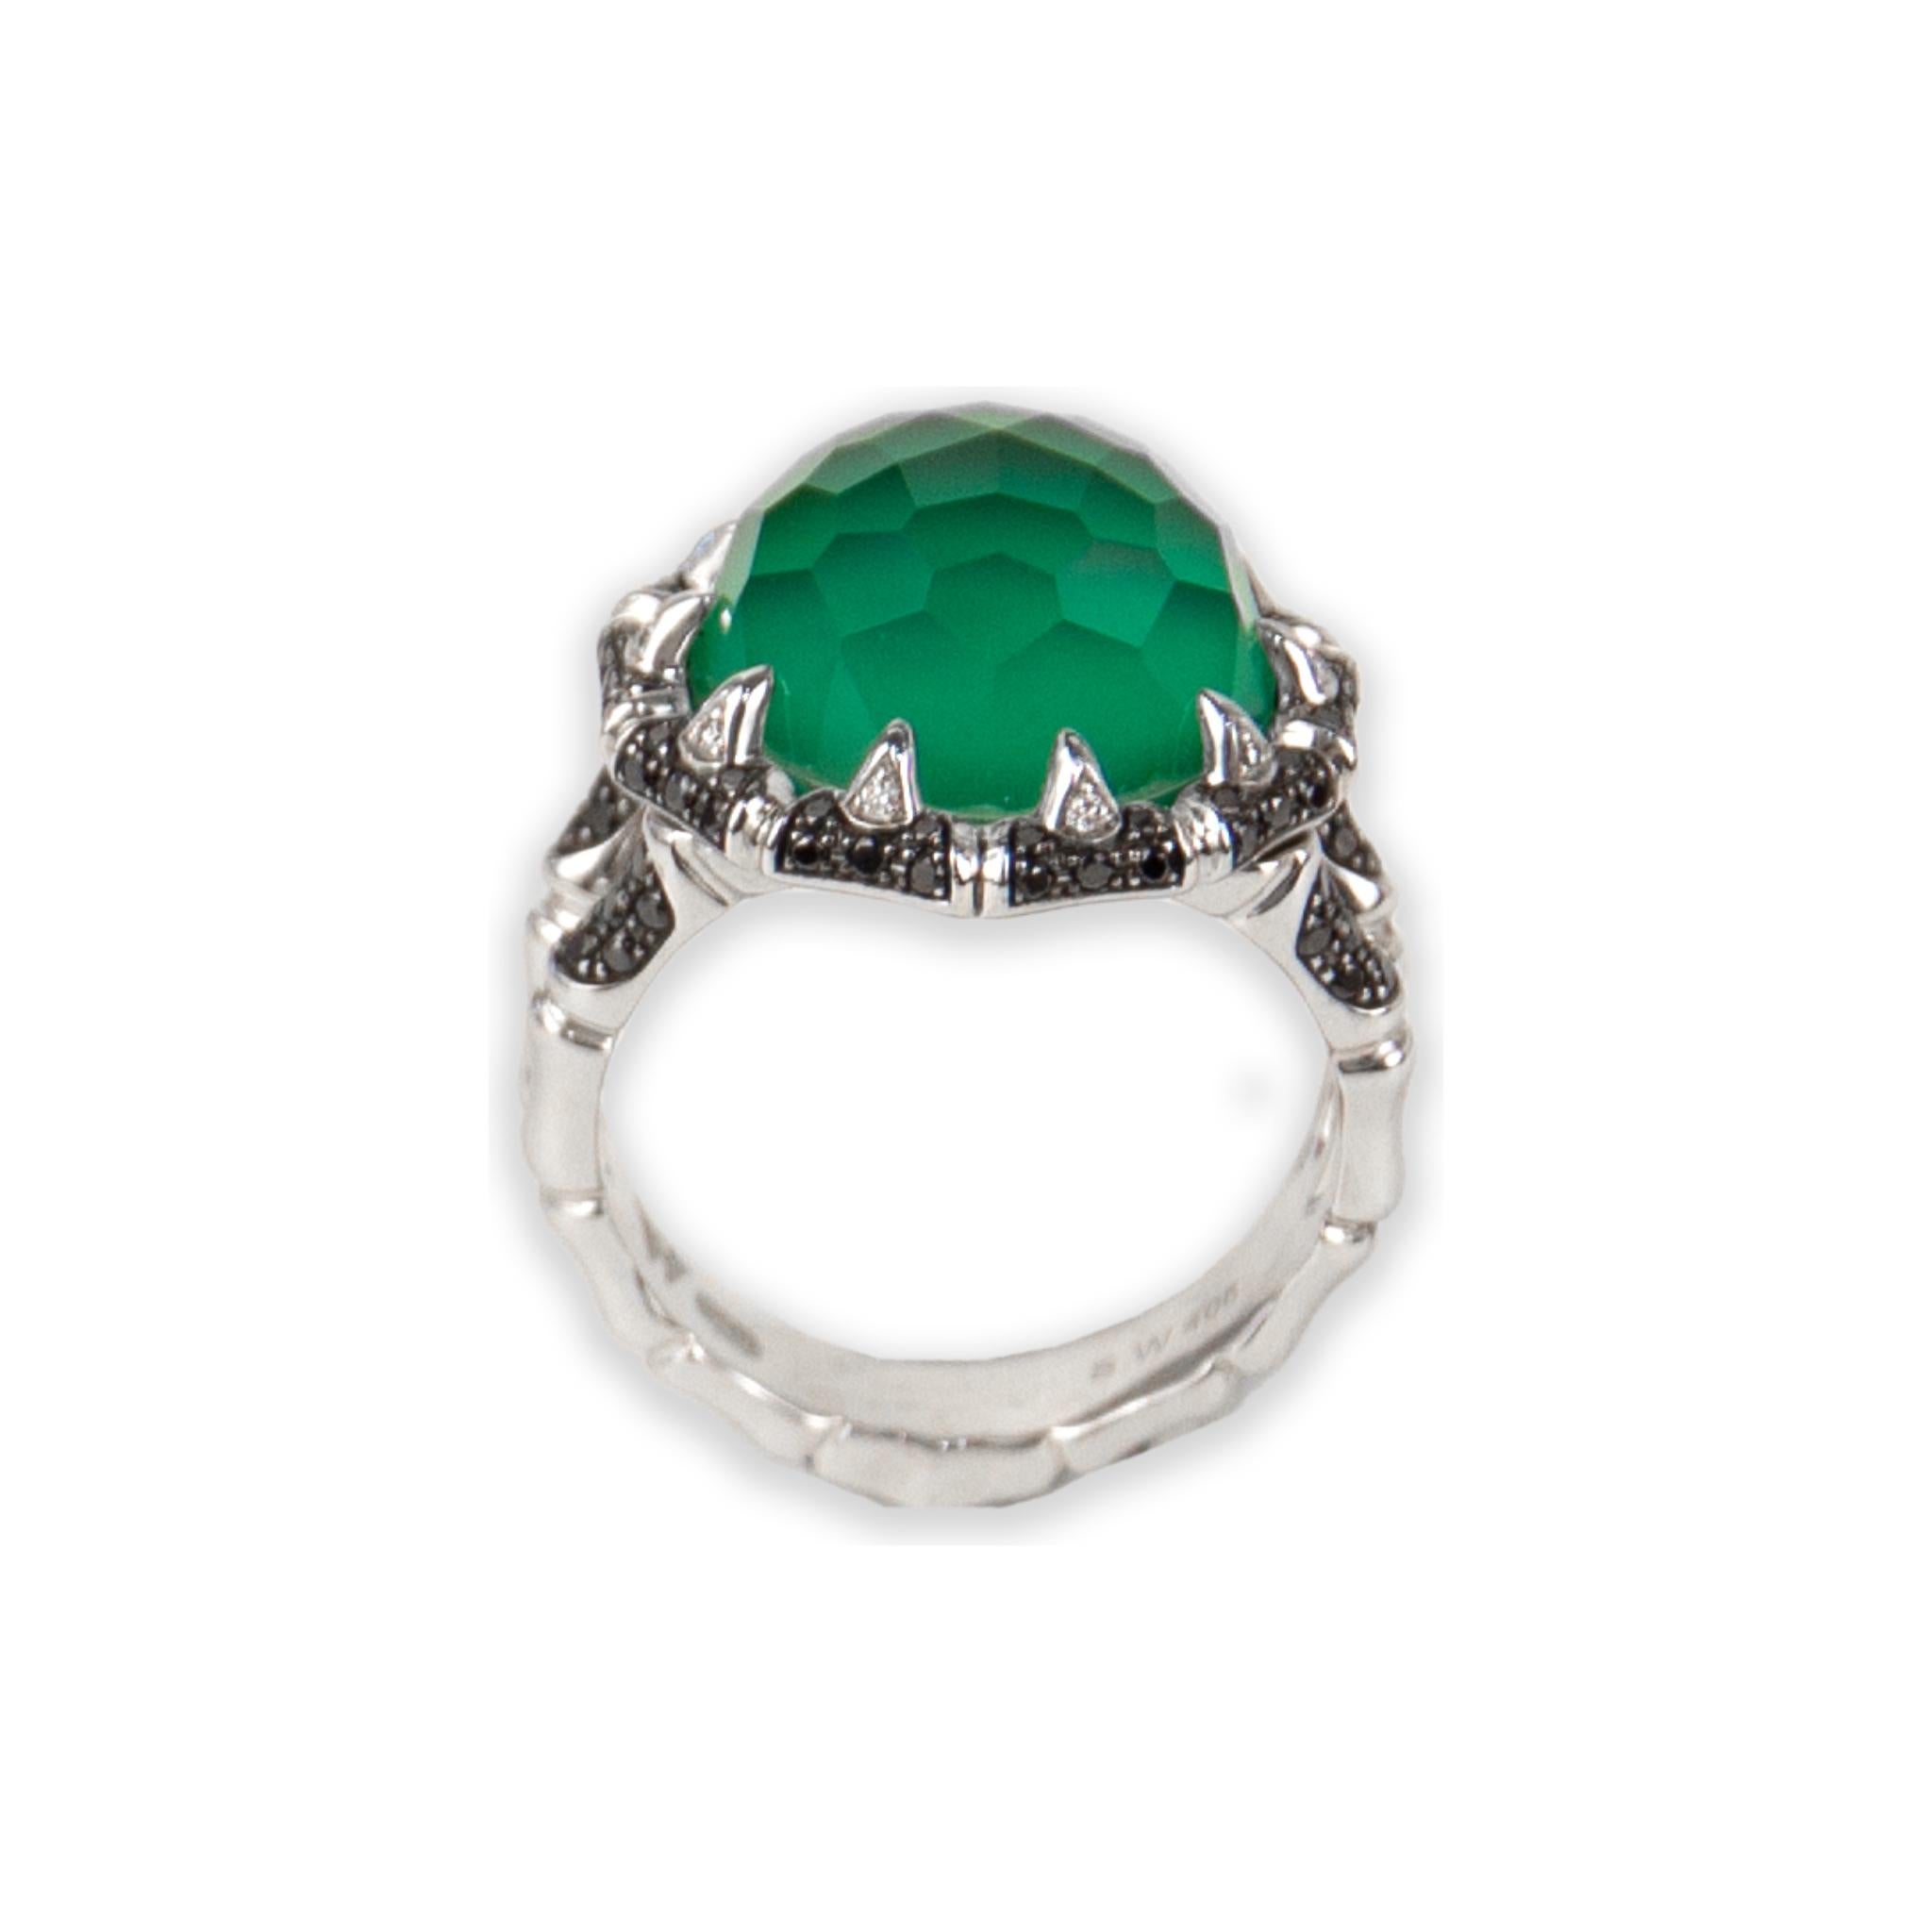 Green agate: 8.4ctw
Diamond: 0.37ctw
Ring Size: 7
SKU: SW01321
Model number: WR792 RING